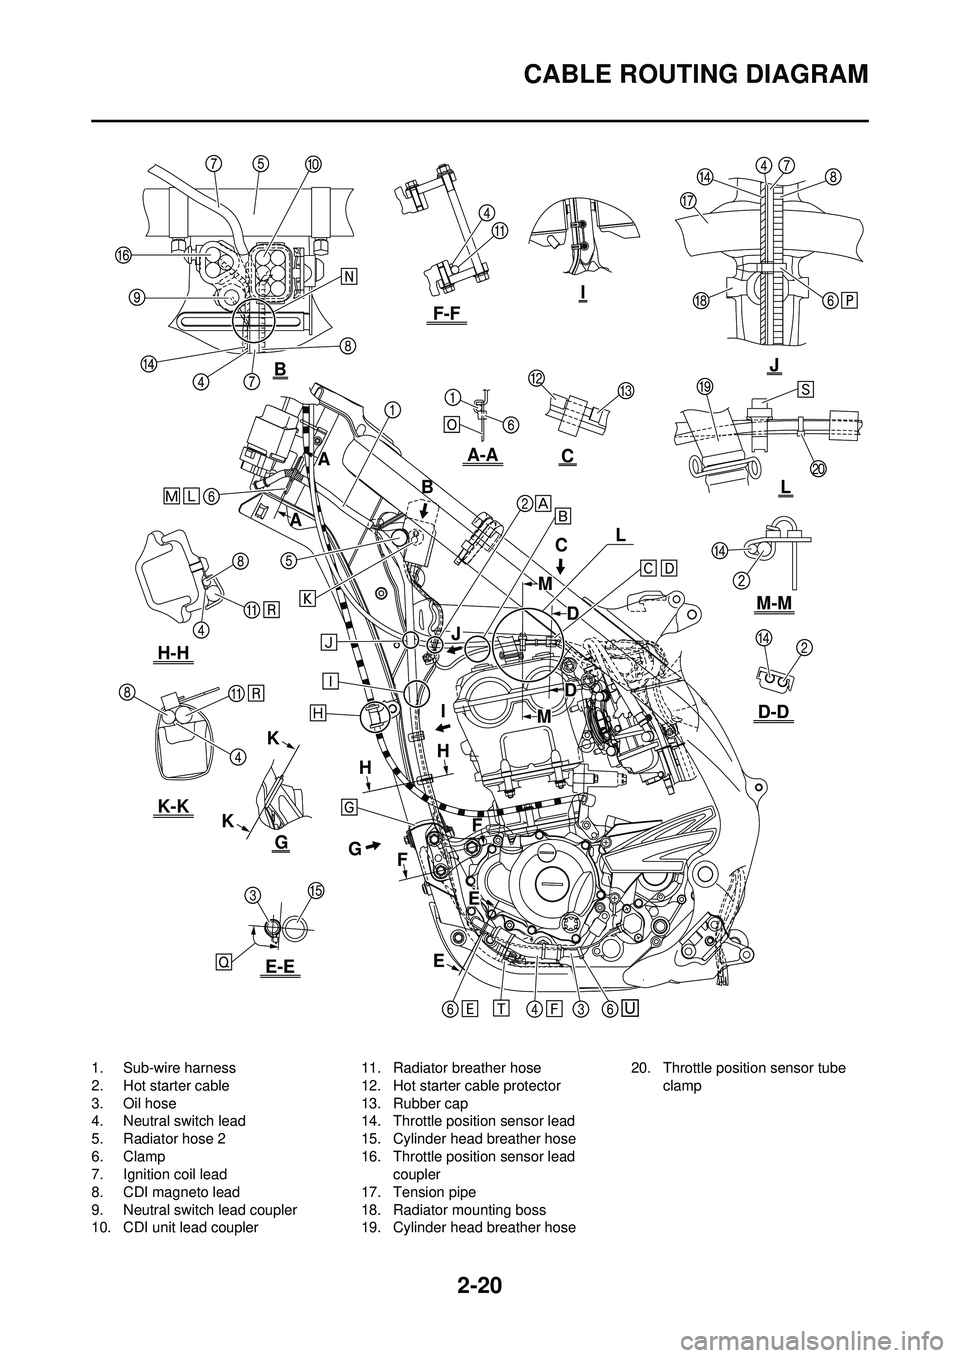 YAMAHA YZ250F 2010  Owners Manual 2-20
CABLE ROUTING DIAGRAM
1. Sub-wire harness
2. Hot starter cable
3. Oil hose
4. Neutral switch lead
5. Radiator hose 2
6. Clamp
7. Ignition coil lead
8. CDI magneto lead
9. Neutral switch lead coup